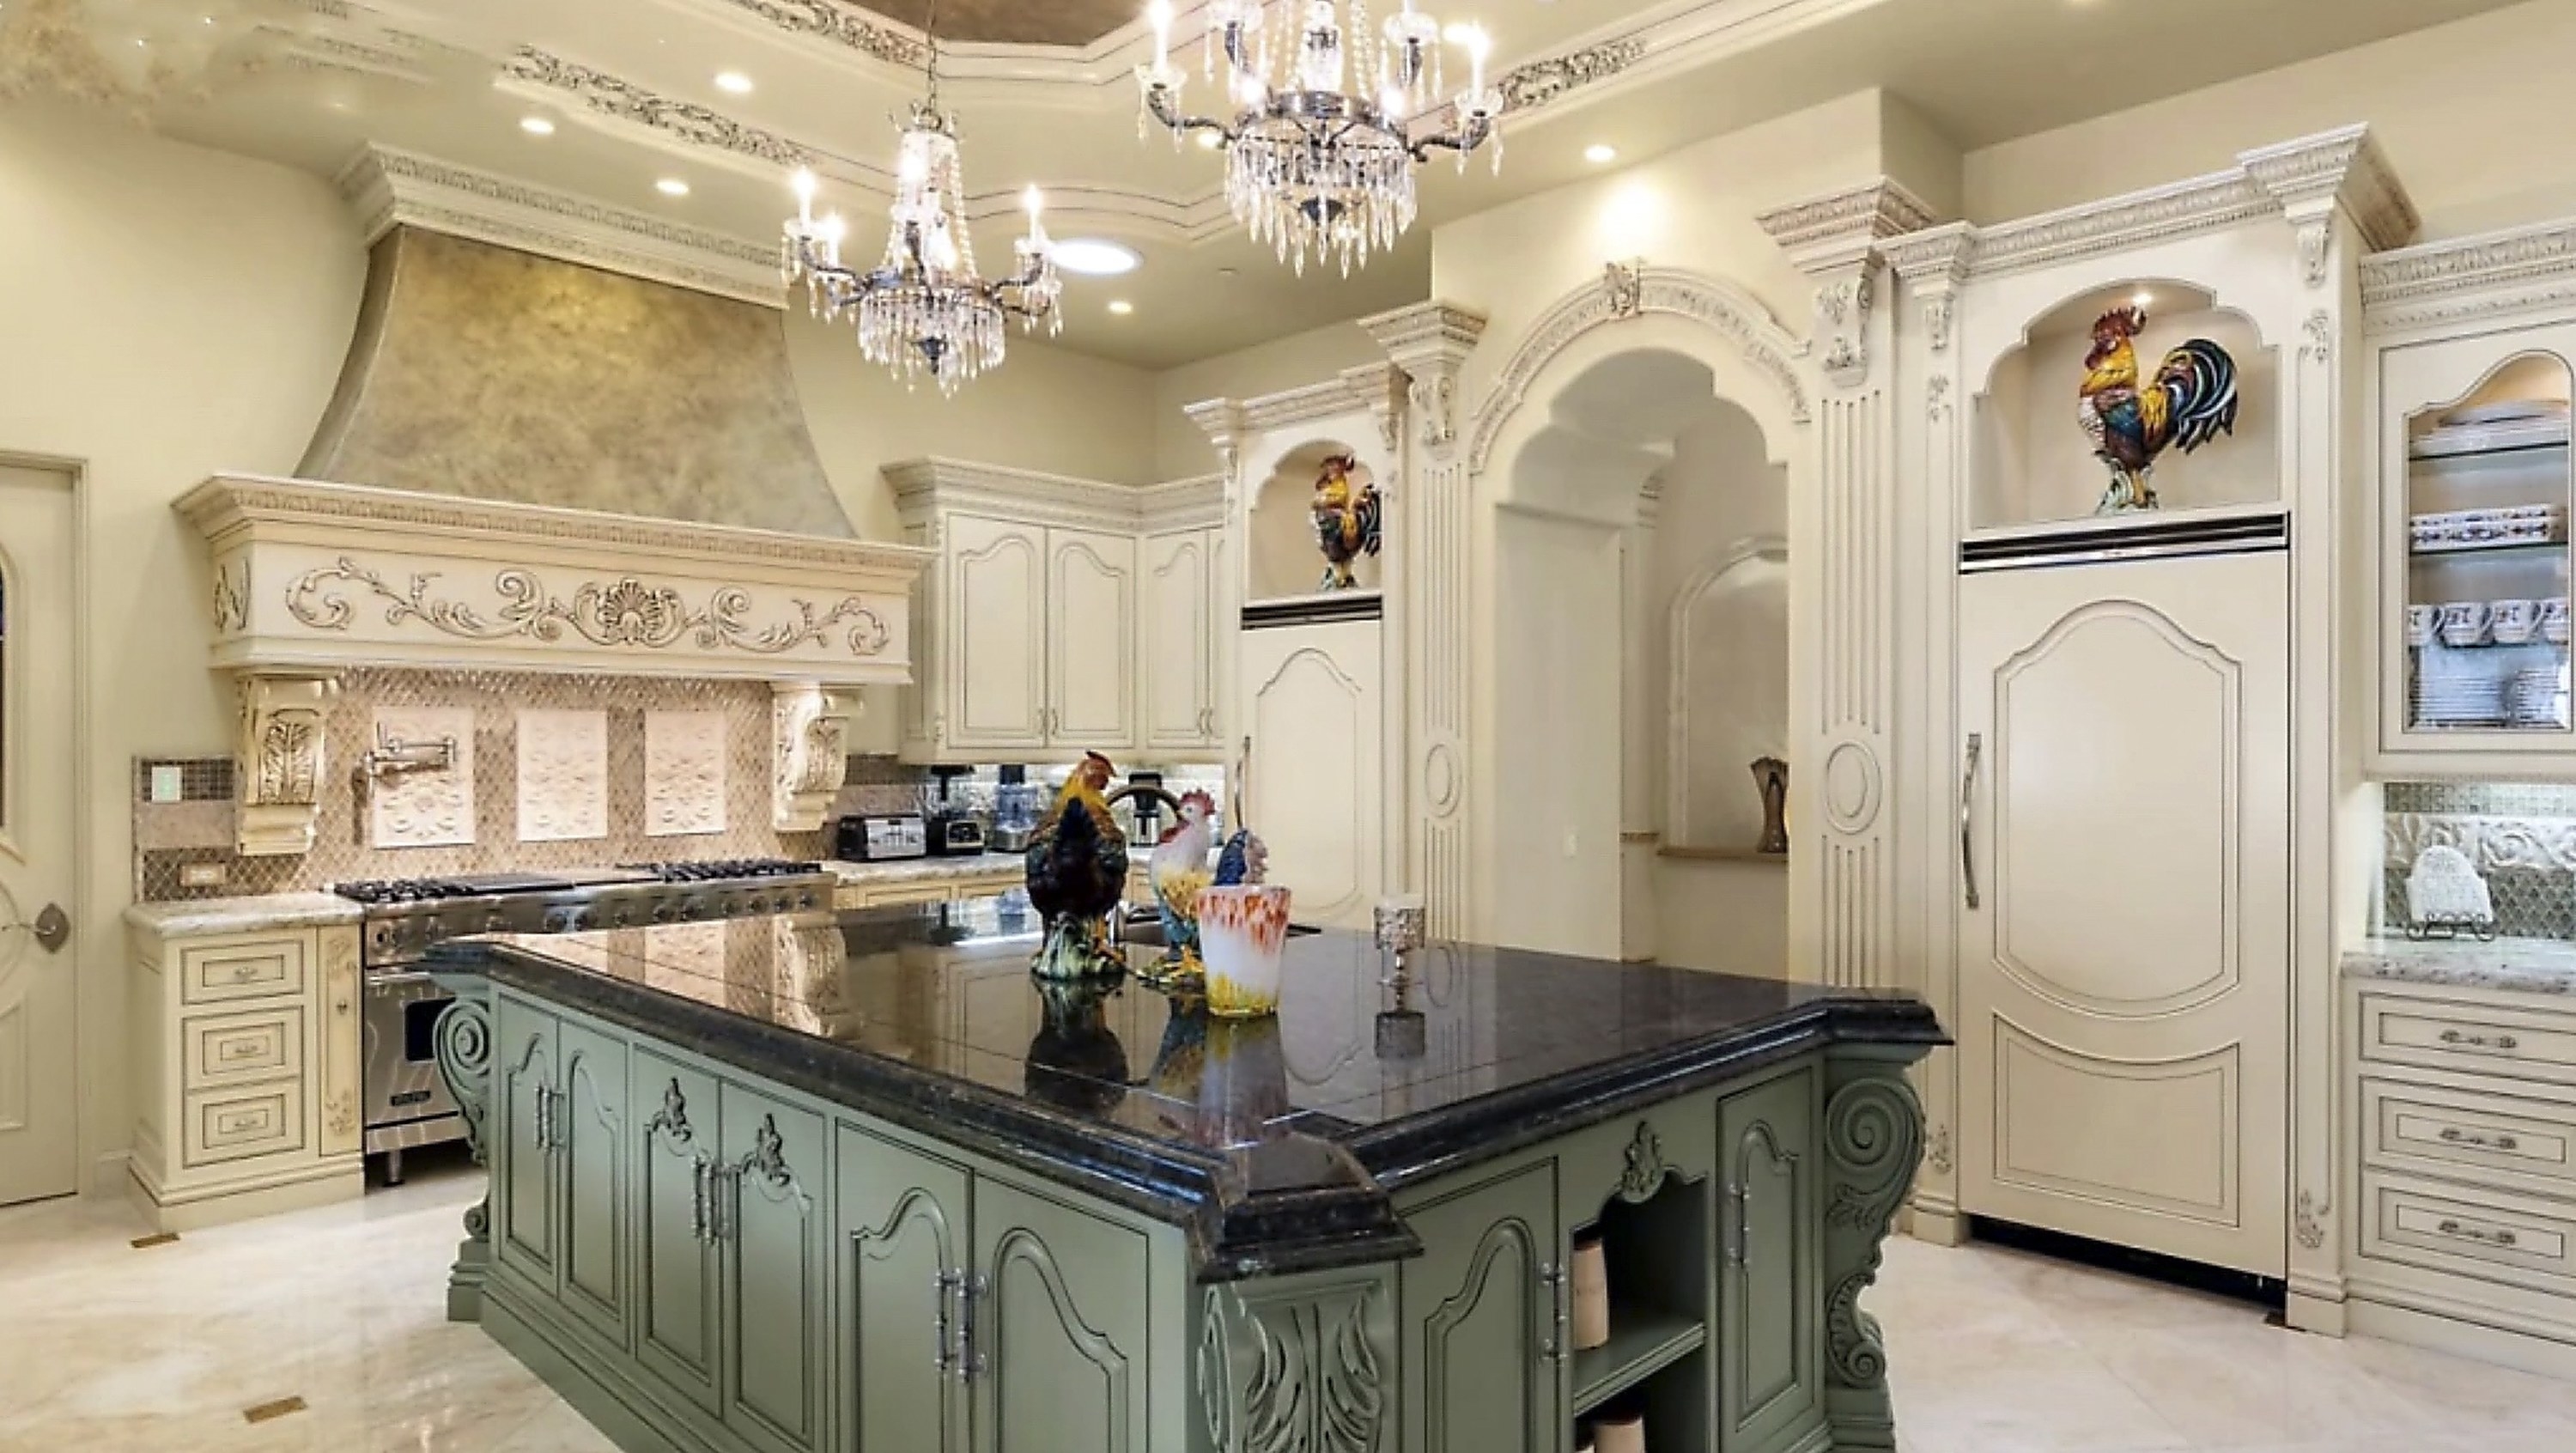 The kitchen island is directly across from the stove and is topped with thick marble